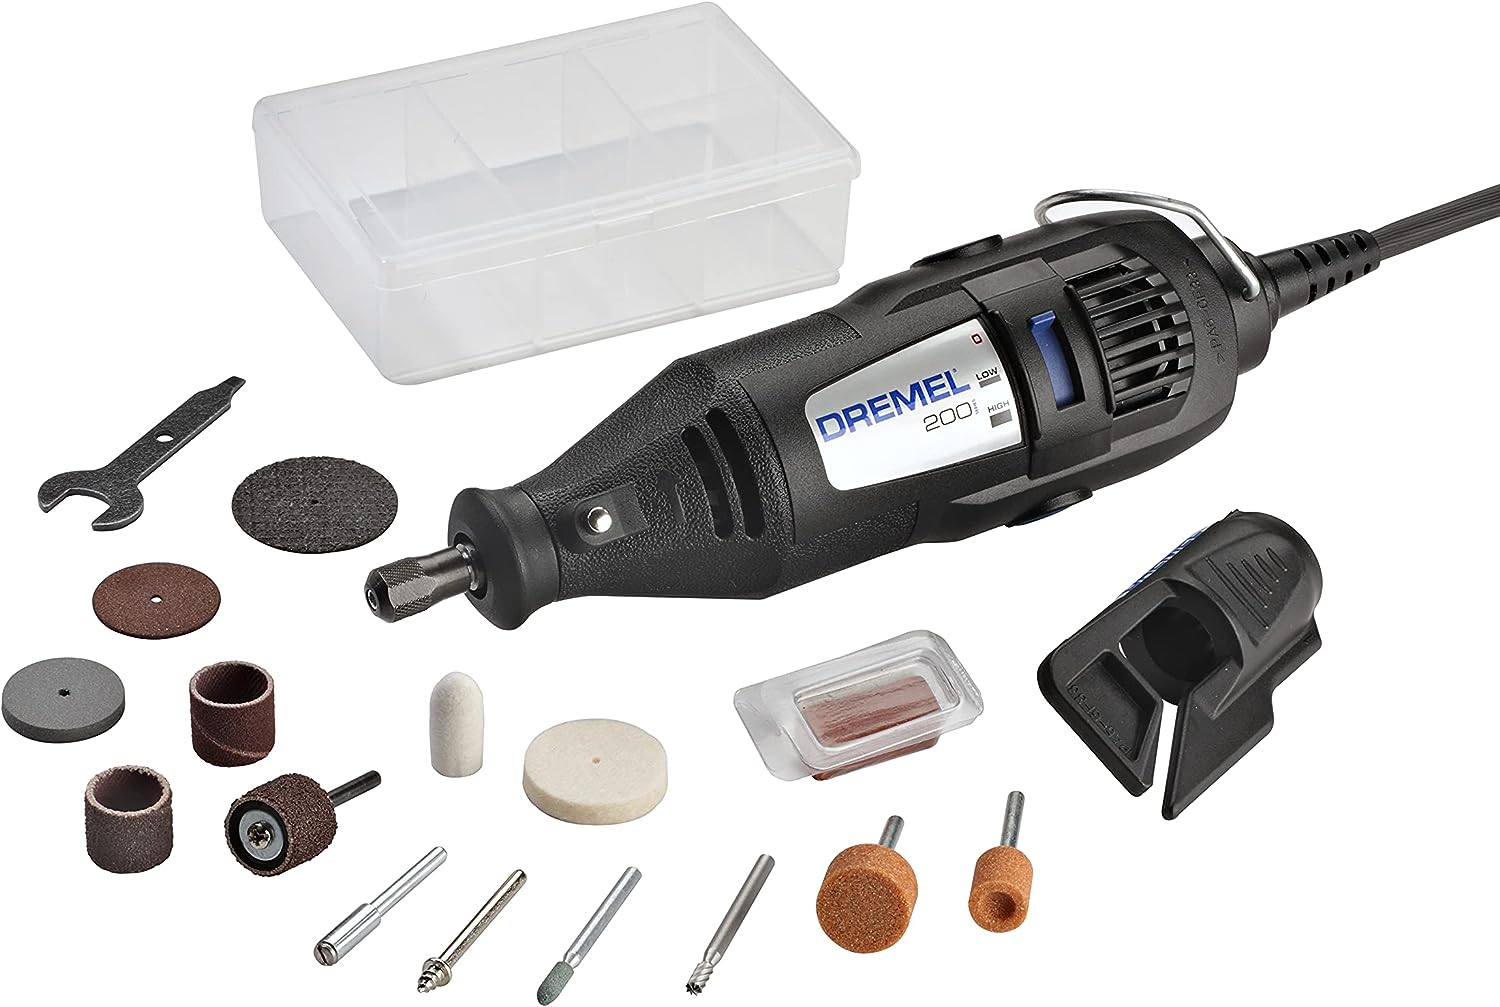 Dremel 200-1/15 Two-Speed Rotary Tool Kit with 1 [...]